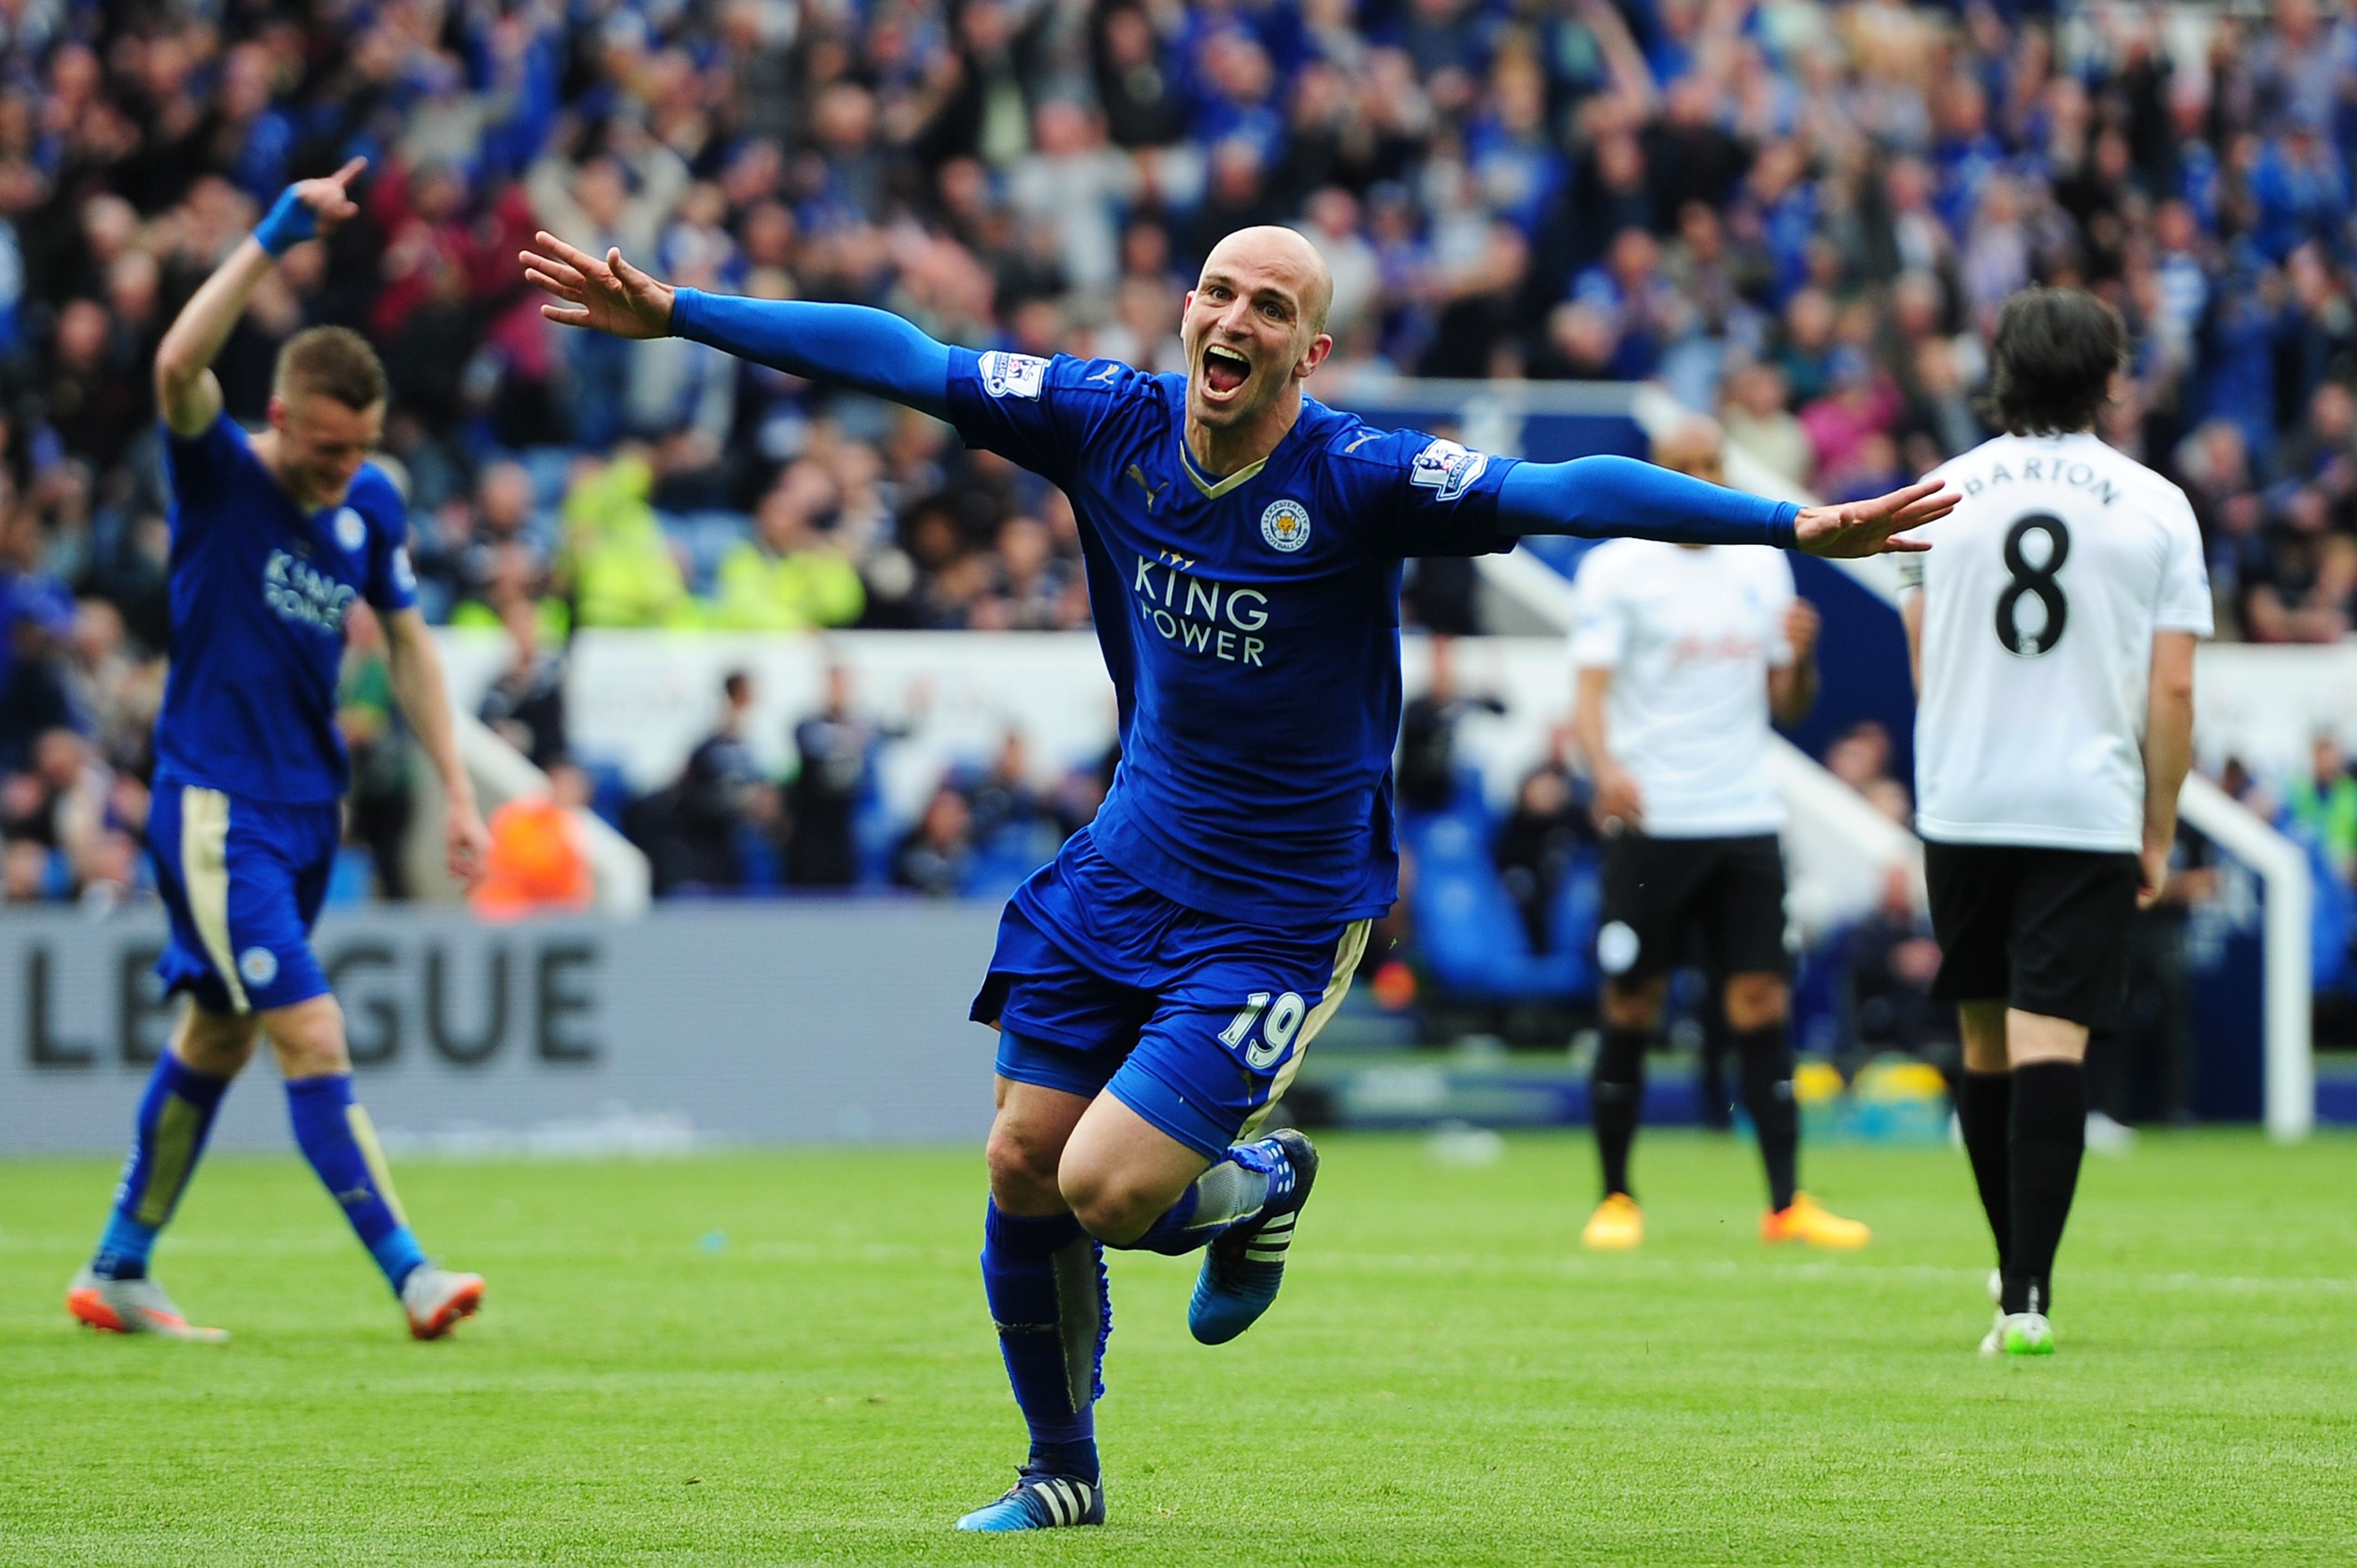 LEICESTER, ENGLAND - MAY 24: Esteban Cambiasso of Leicester City celebrates scoring his team's fourth goal during the Barclays Premier League match between Leicester City and Queens Park Rangers at The King Power Stadium on May 24, 2015 in Leicester, England. (Photo by Dan Mullan/Getty Images)